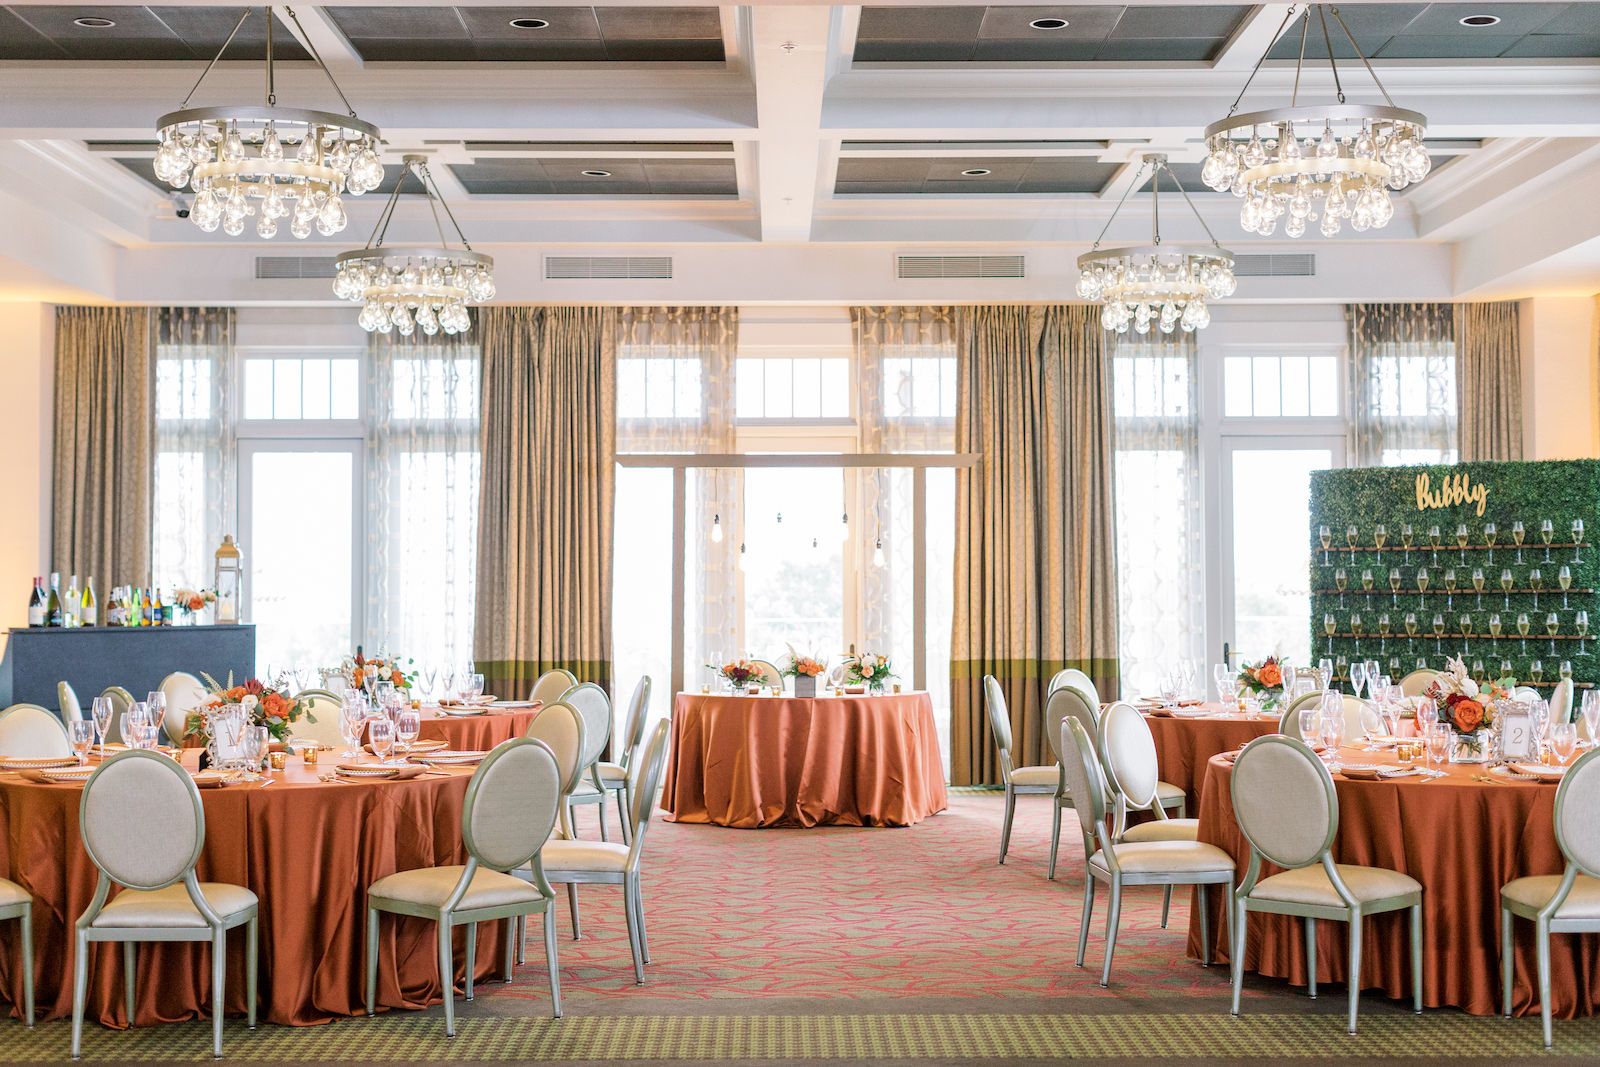 St. Pete Wedding Venue The Birchwood | Intimate Micro Wedding Elopement COVID Styled Shoot | Fall Autumn Wedding Inspiration | Indoor Hotel Ballroom Reception with Orange Copper Wedding Table Linens | Outside the Box Event Rentals | Breezin' Weddings